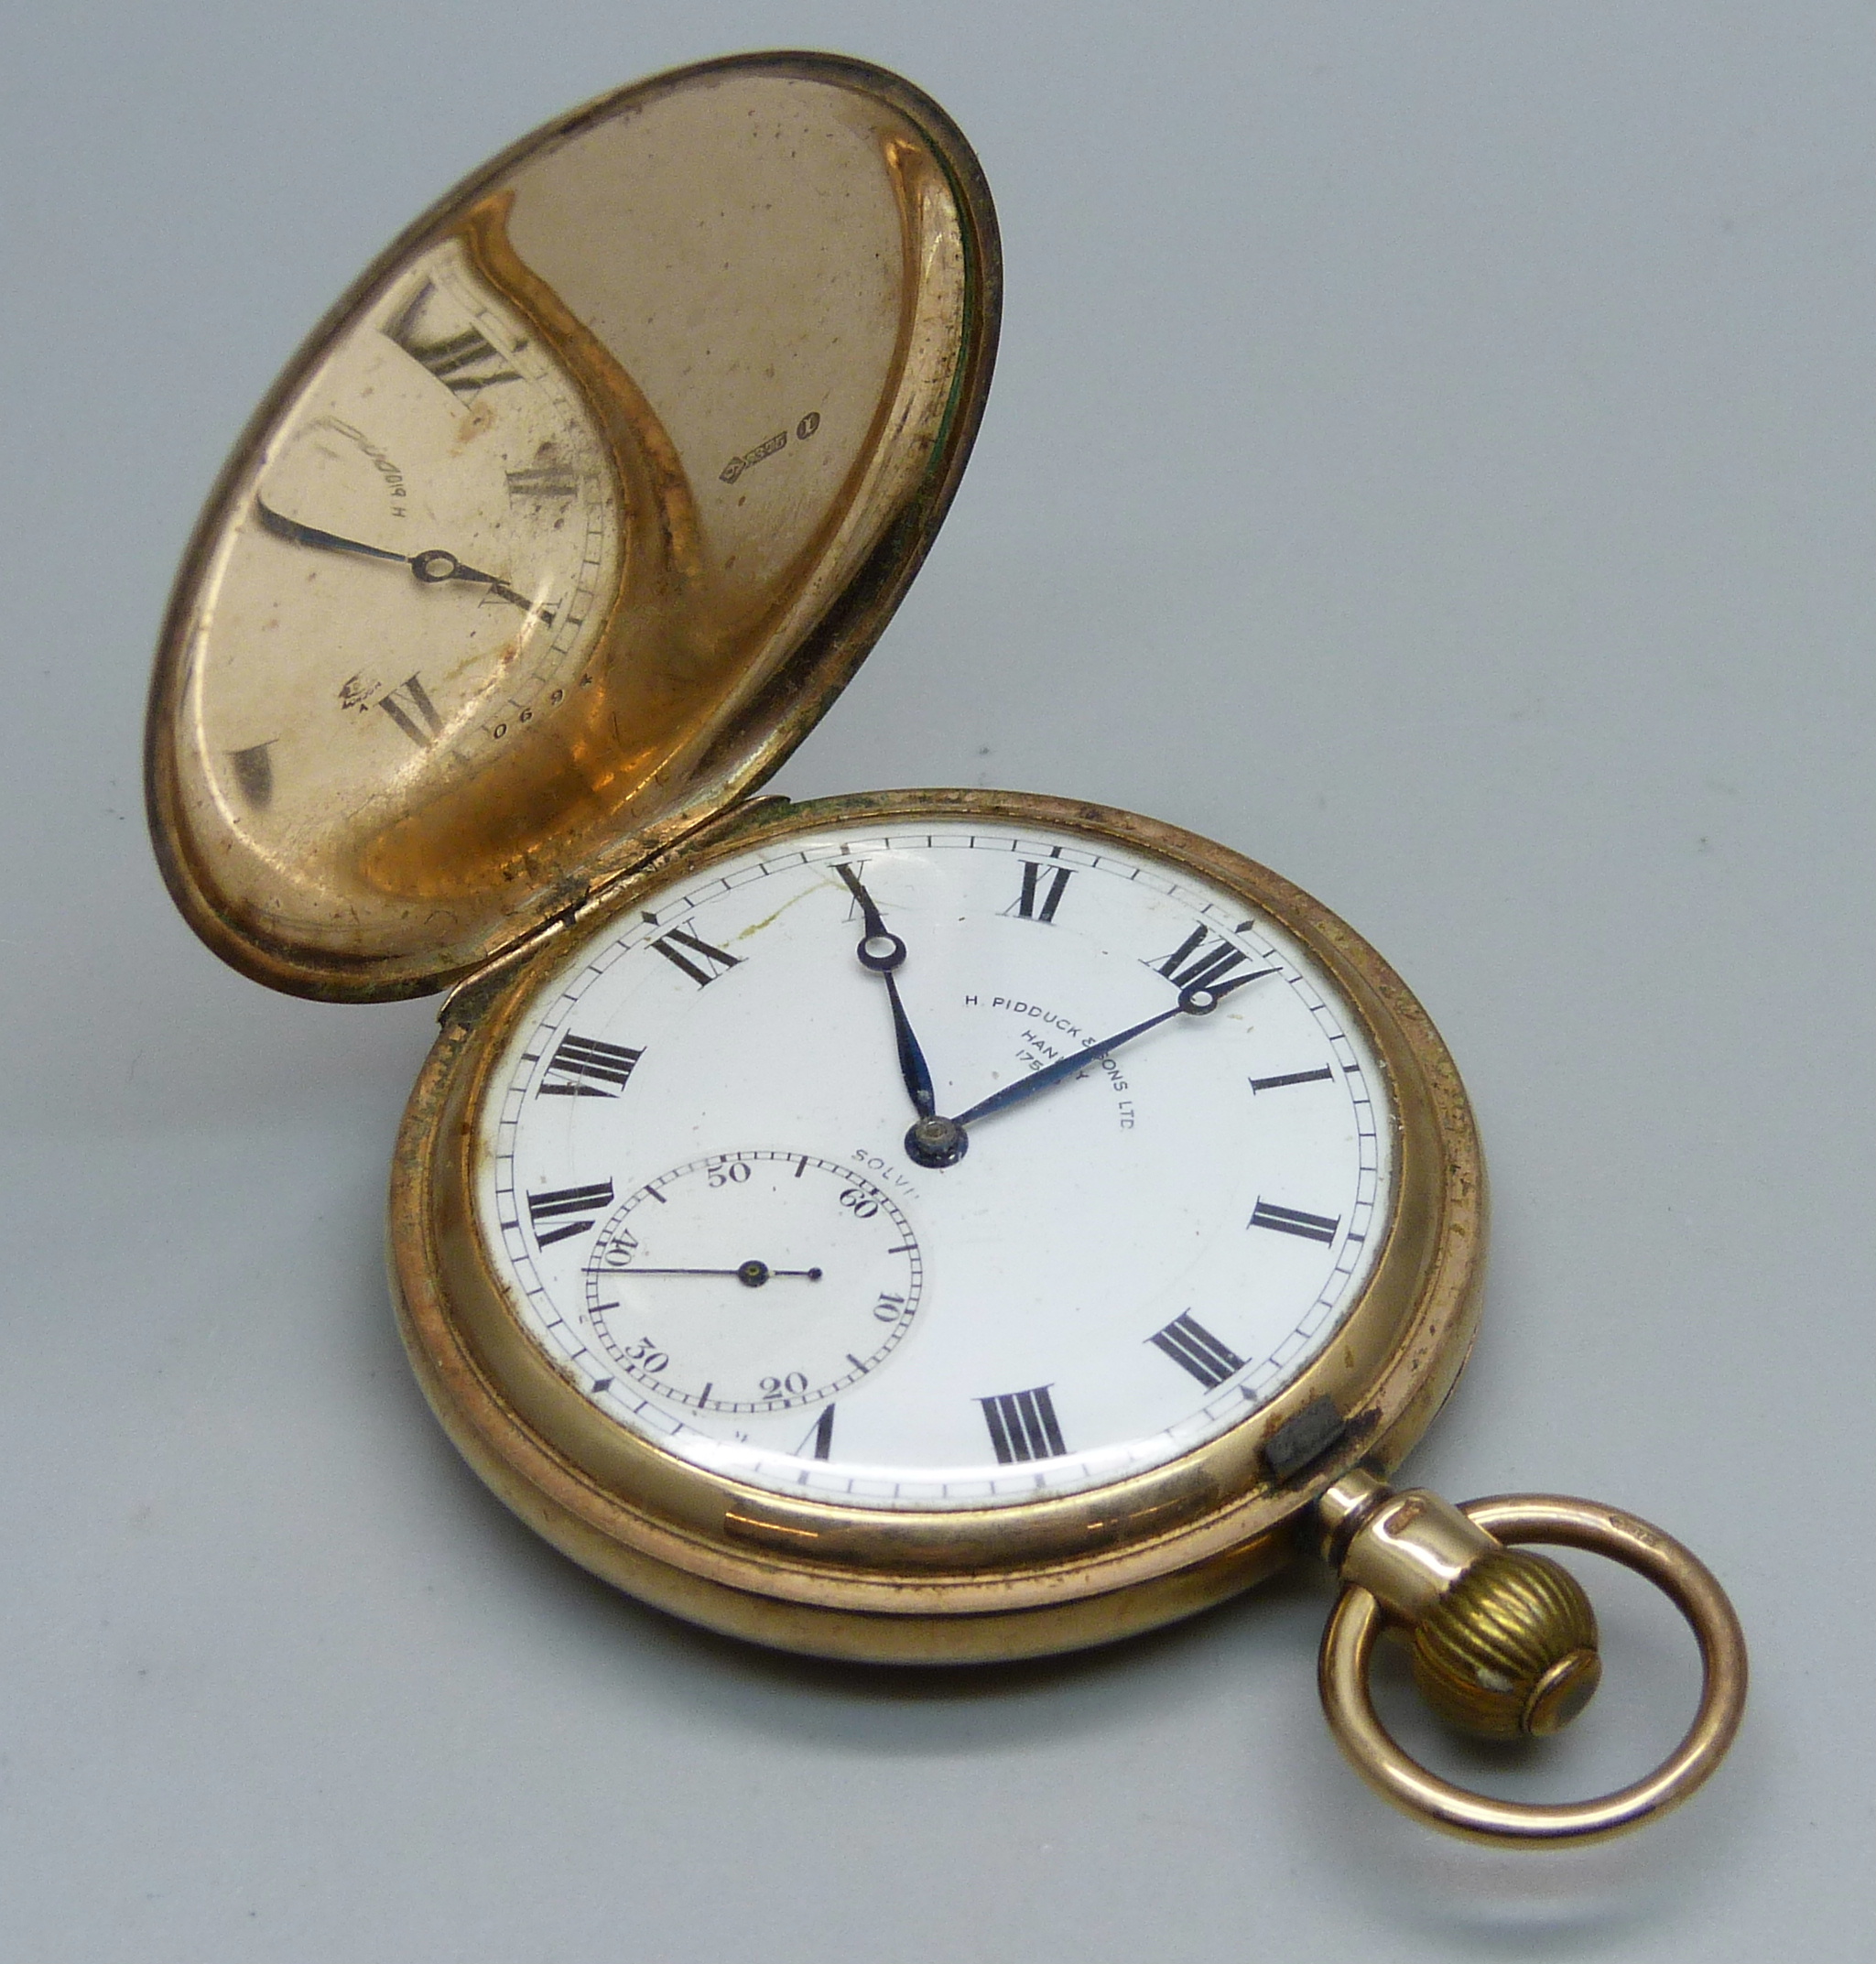 A 9ct gold full-hunter pocket watch, inner case 9ct gold, bears inscription dated 1928 and monogram,